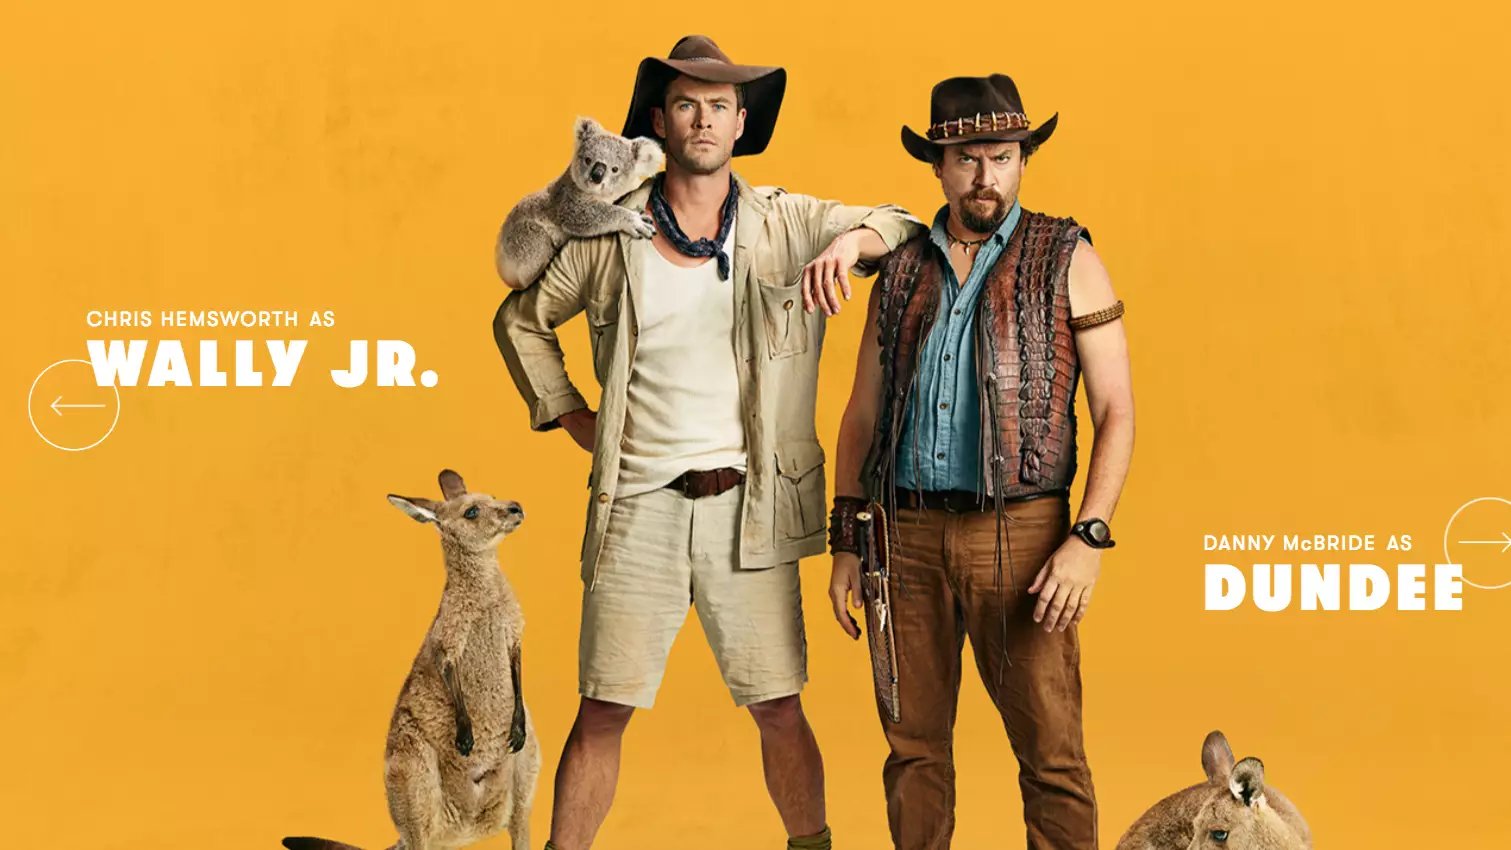 Have Danny McBride And Chris Hemsworth Just Secretly Made A 'Crocodile Dundee' Reboot?